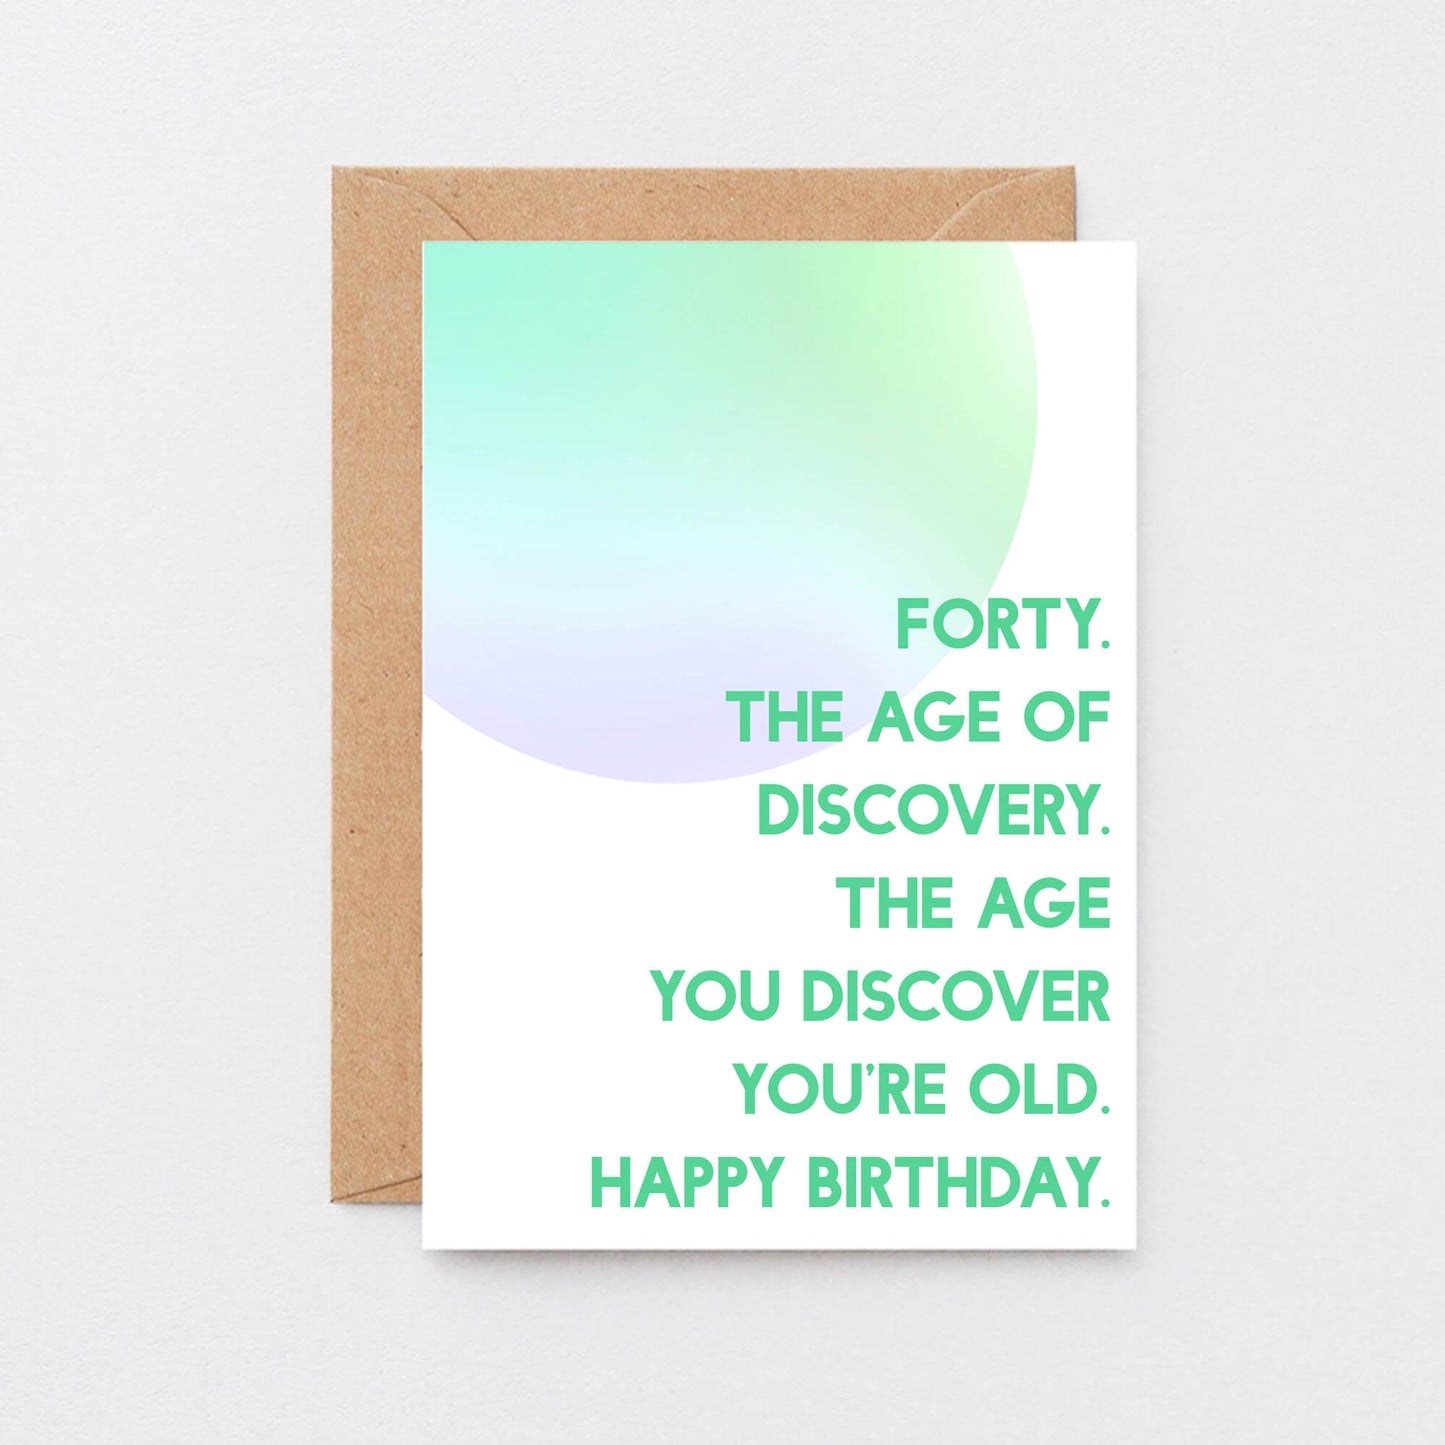 40th Birthday Card by SixElevenCreations. Reads Forty. The age of discovery. The age you discover you're old. Happy birthday. Product Code SE2055A6